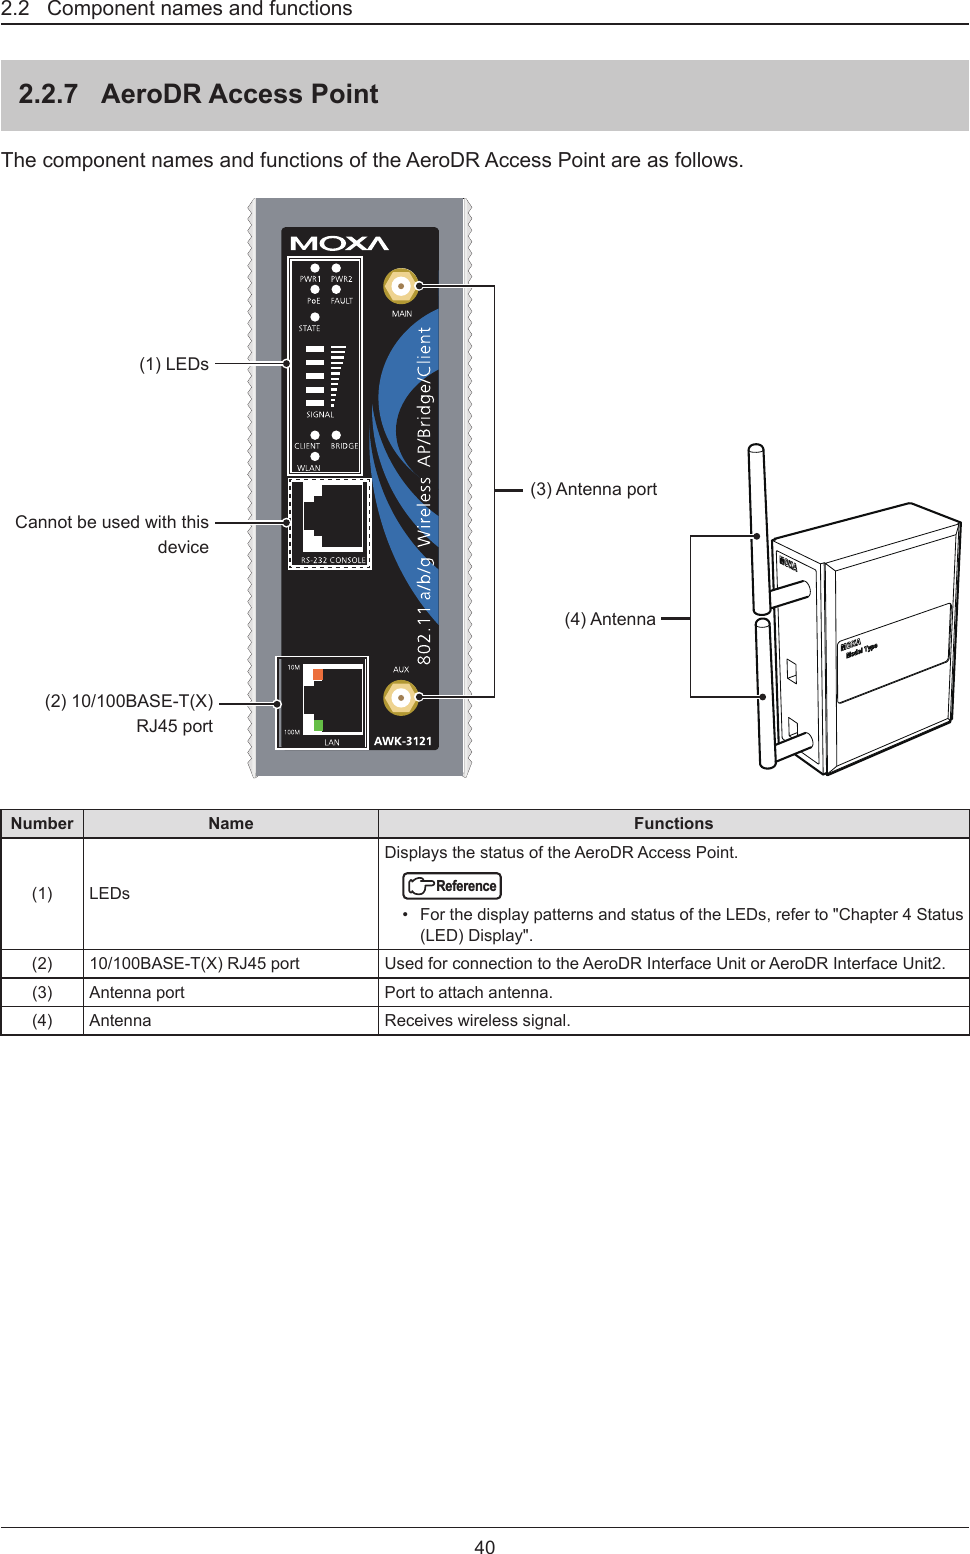 402.2   Component names and functions2.2.7  AeroDR Access PointThe component names and functions of the AeroDR Access Point are as follows. (2) 10/100BASE-T(X) RJ45 port(3) Antenna port(4) AntennaCannot be used with this device(1) LEDsNumber Name Functions(1) LEDsDisplays the status of the AeroDR Access Point.Reference•  For the display patterns and status of the LEDs, refer to &quot;Chapter 4 Status (LED) Display&quot;.(2) 10/100BASE-T(X) RJ45 port Used for connection to the AeroDR Interface Unit or AeroDR Interface Unit2.(3) Antenna port Port to attach antenna. (4) Antenna Receives wireless signal.